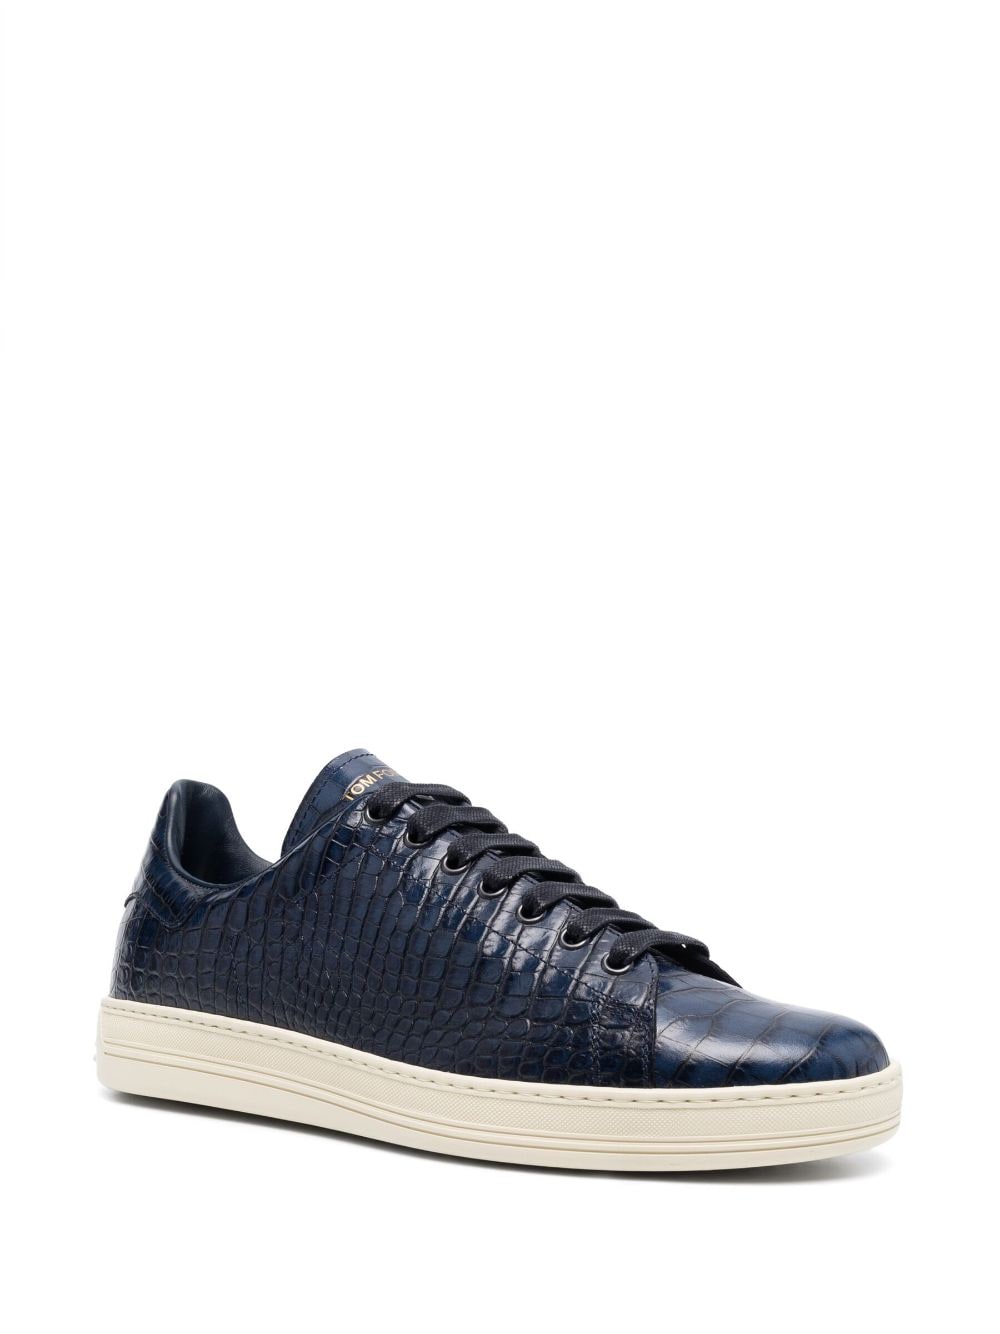 TOM FORD crocodile-embossed Leather Sneakers - Farfetch